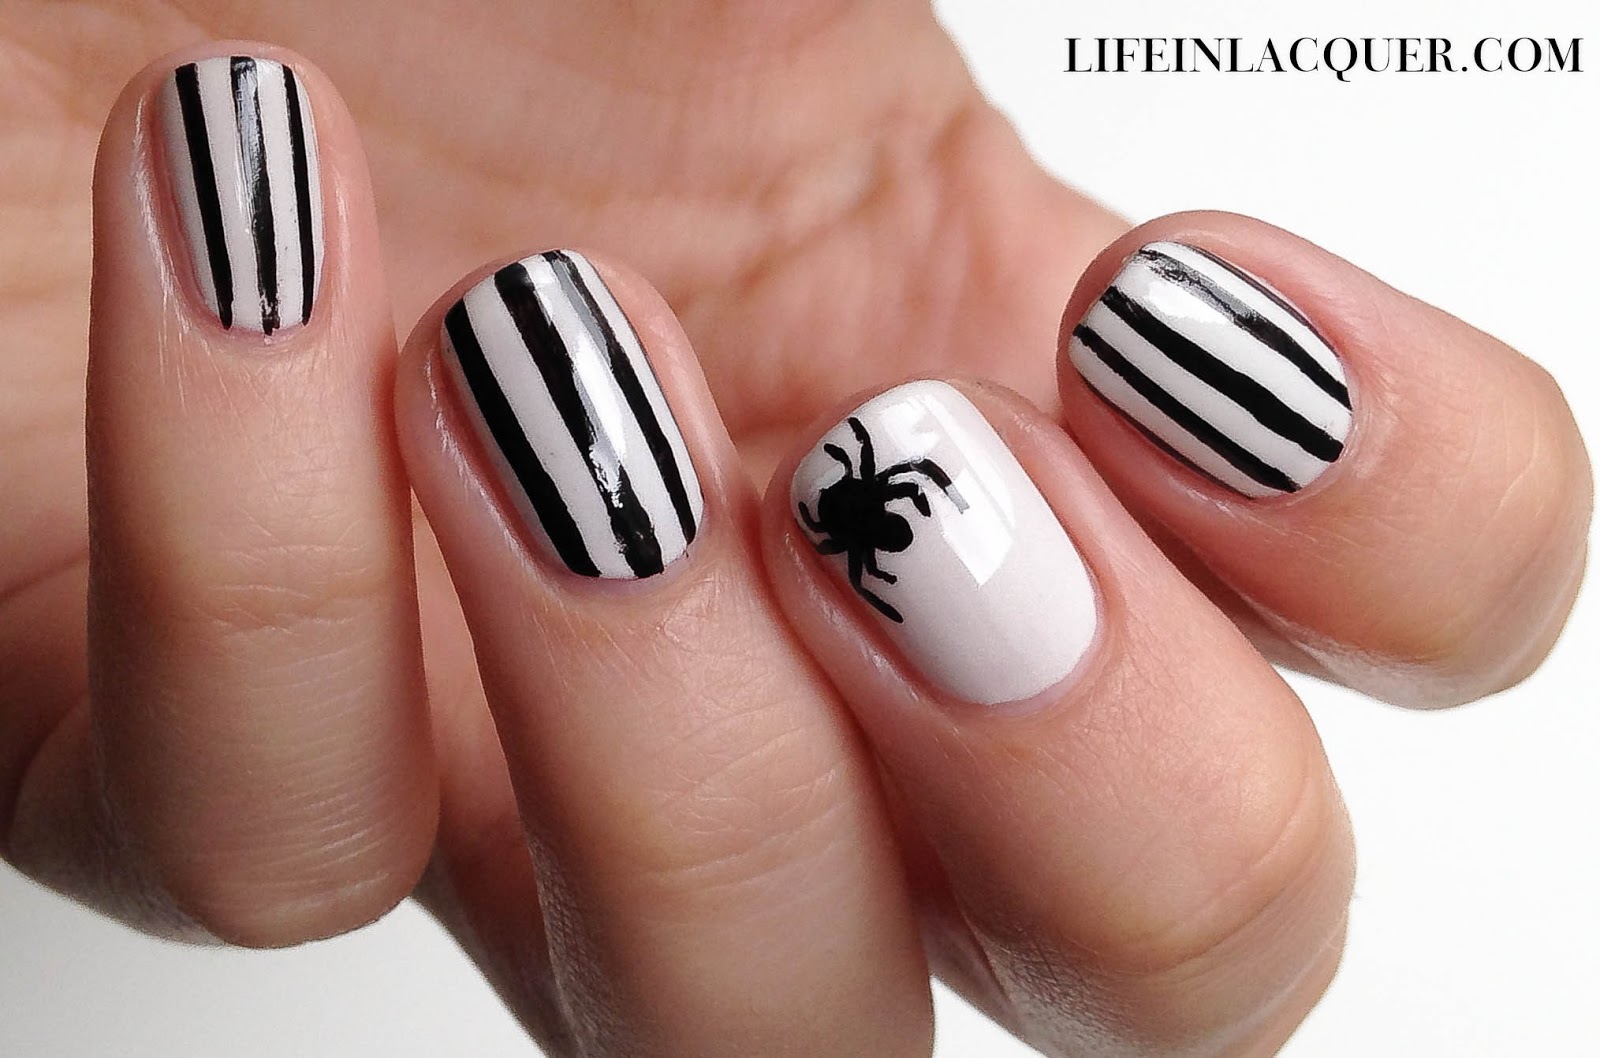 10. Creepy Crawly Spider Nail Art for Halloween - wide 9